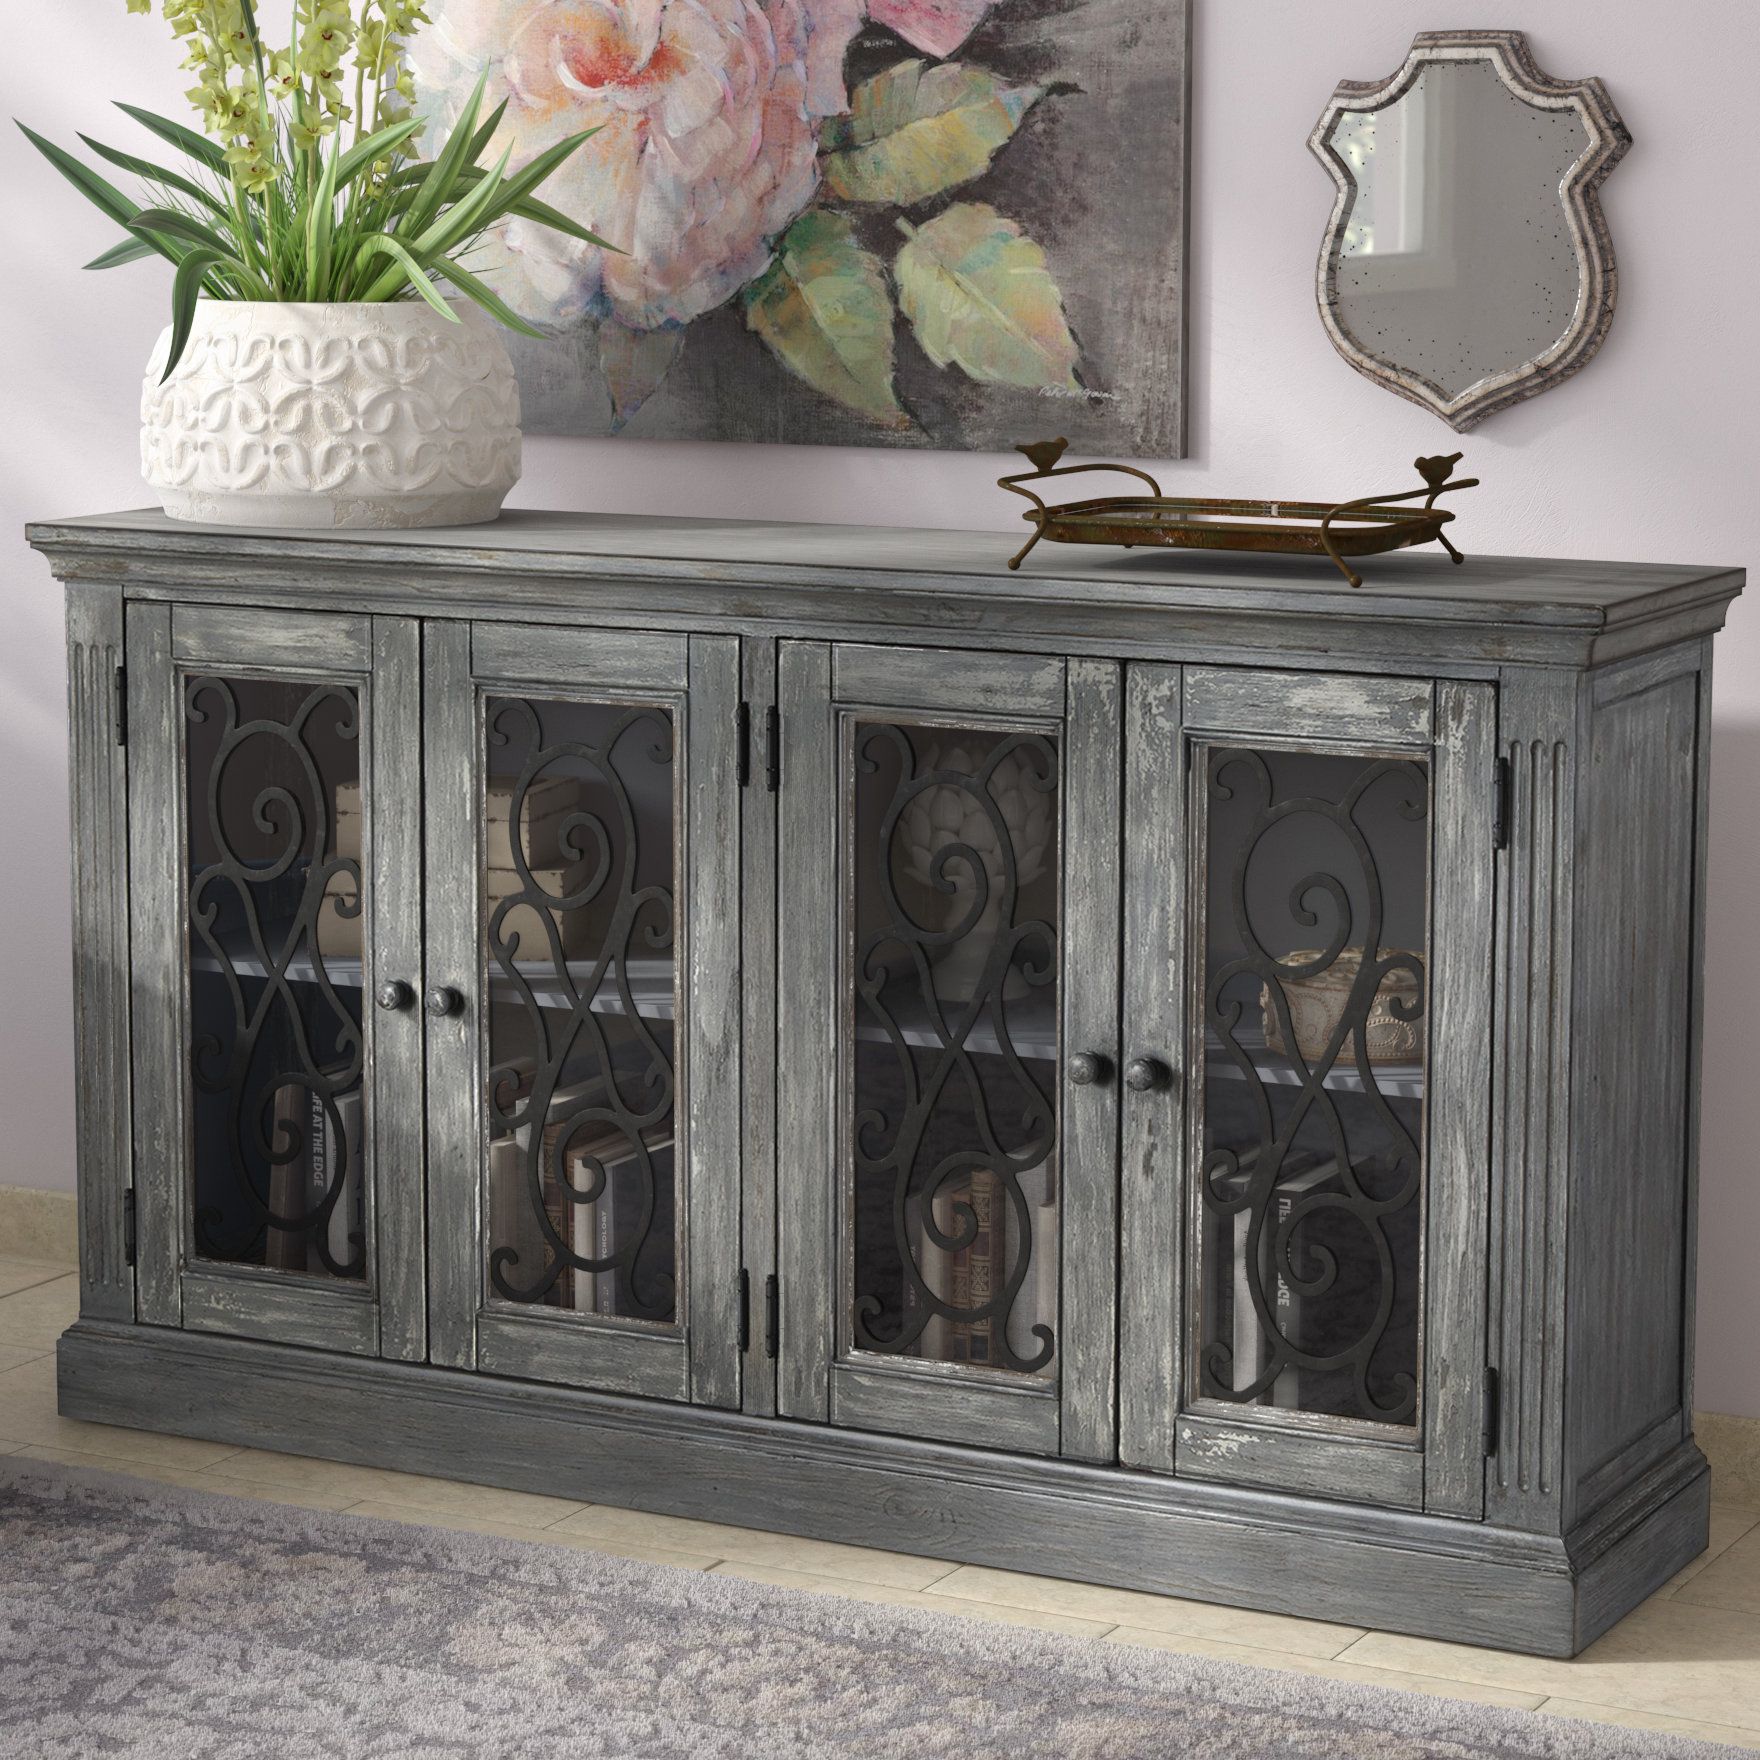 Lark Manor Raquette Sideboard & Reviews | Wayfair Within Raquette Sideboards (View 4 of 30)